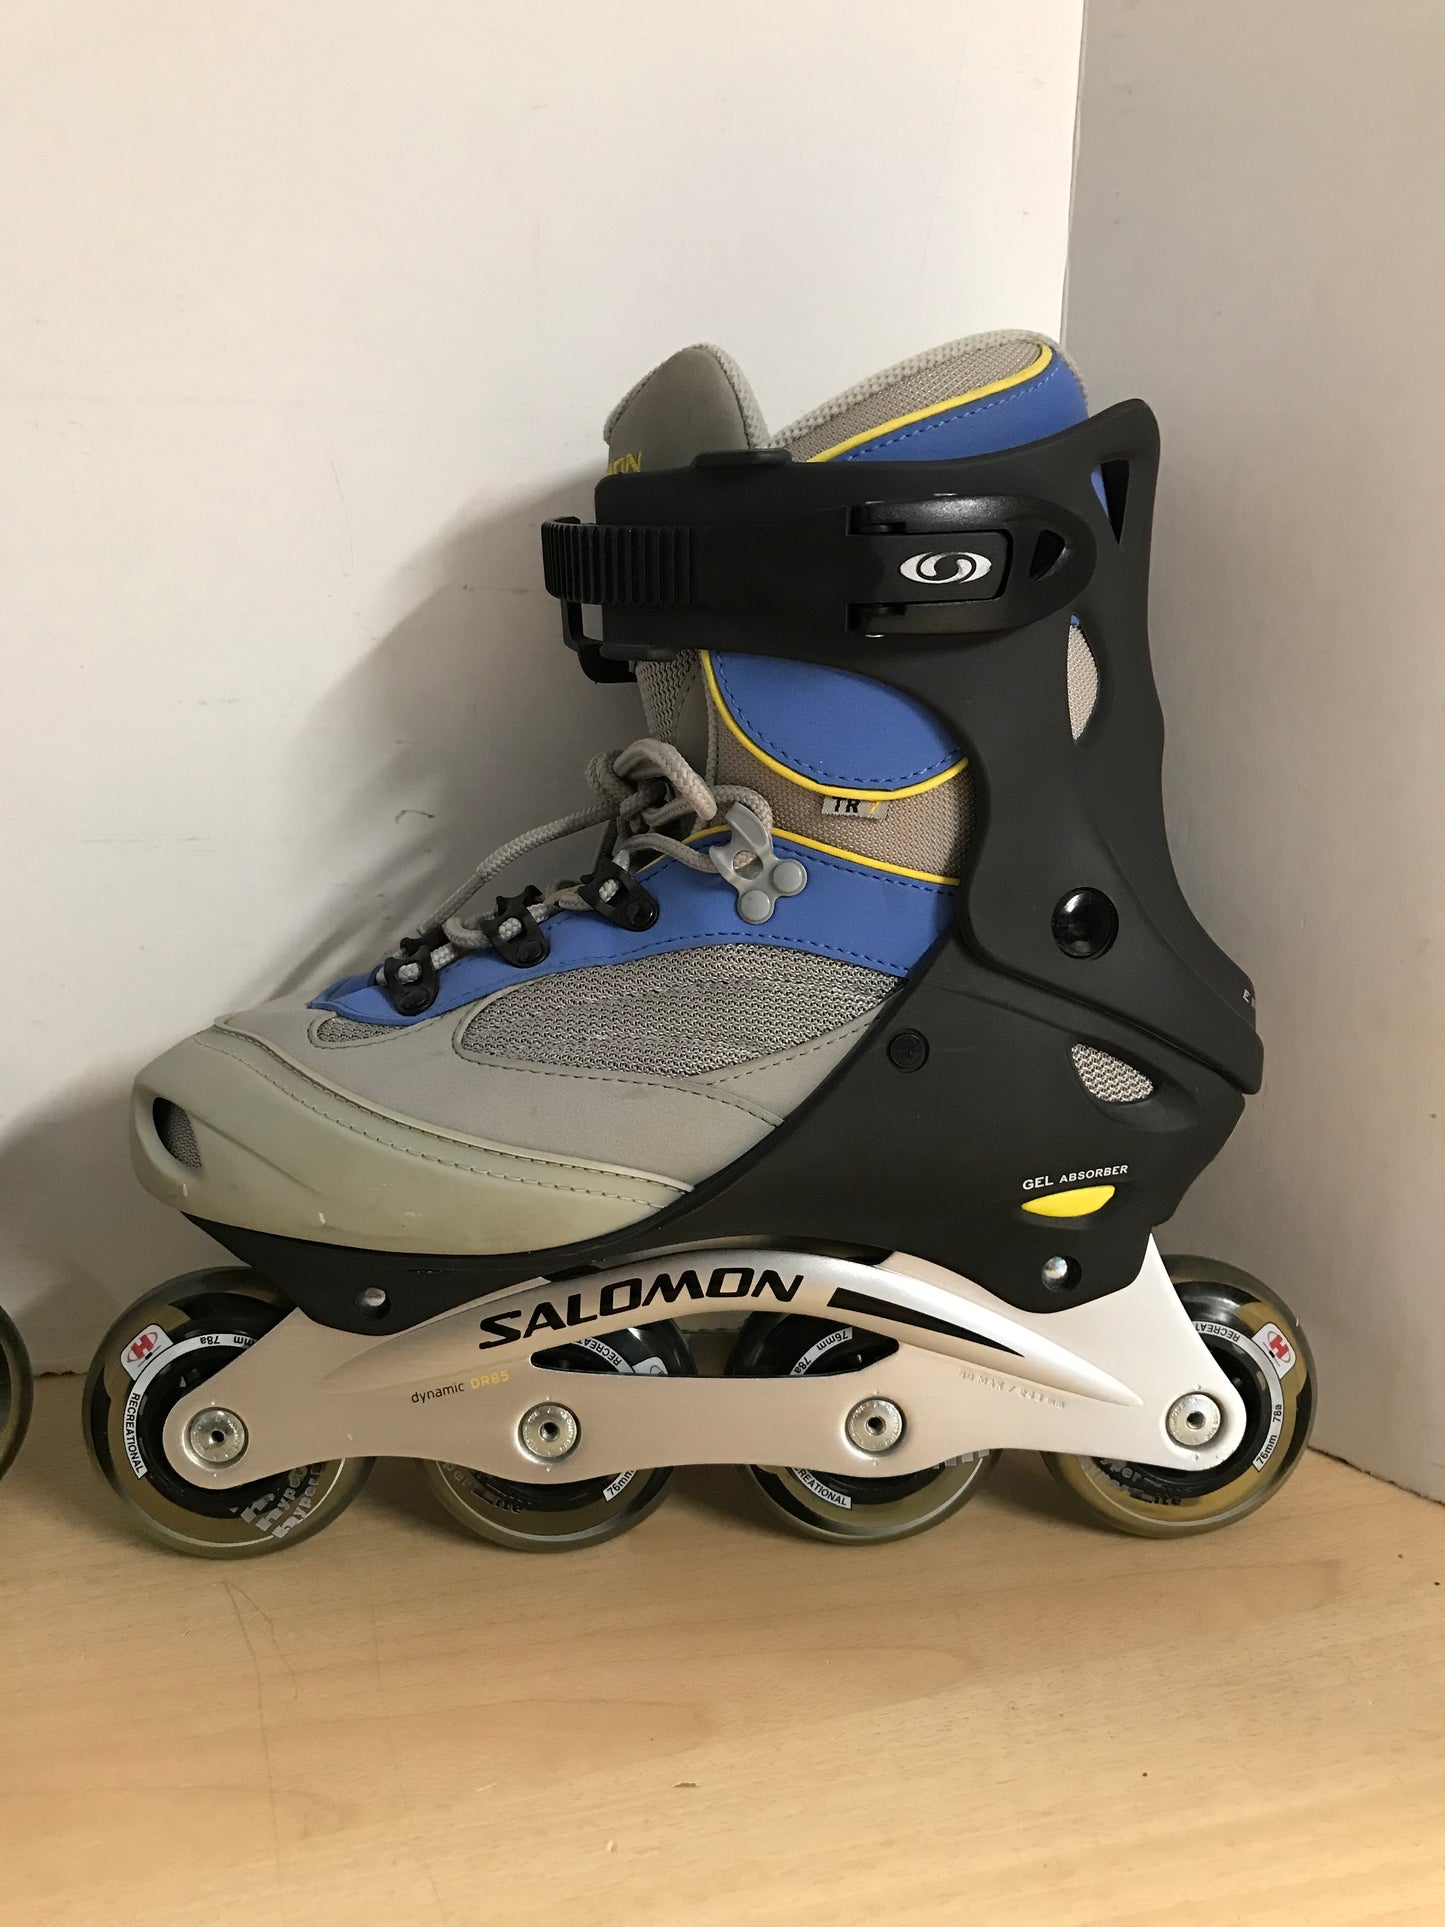 Inline Roller Skates Ladies Size 7.5 Salomon Blue Grey With Rubber Wheels As New